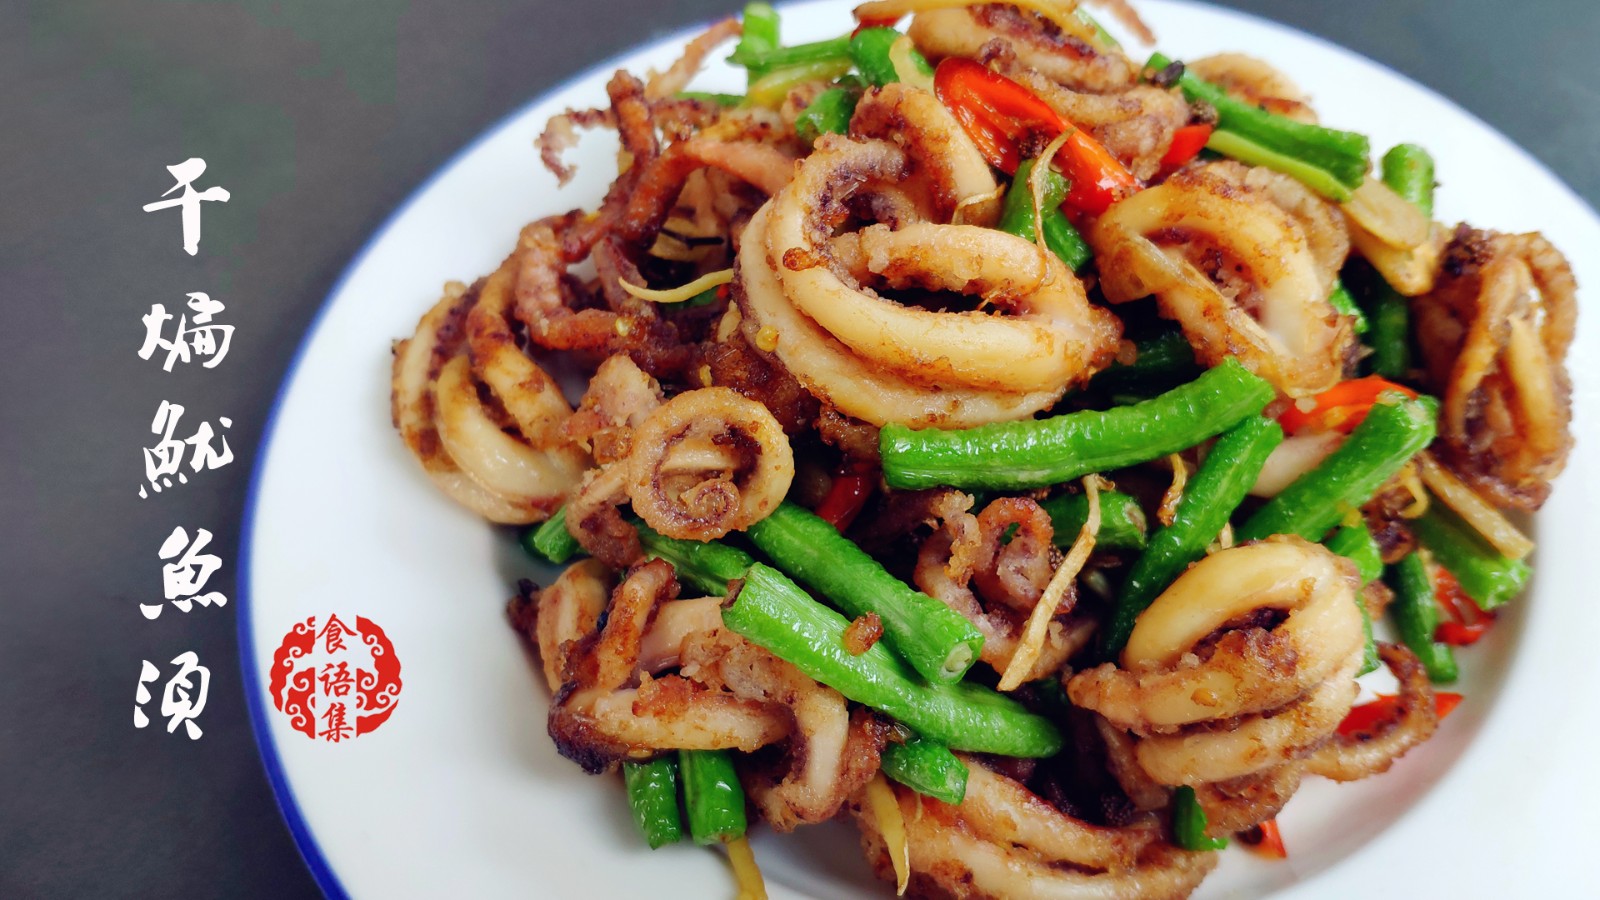 Very homely dishes: dried squid whiskers, spicy and spicy, super delicious!